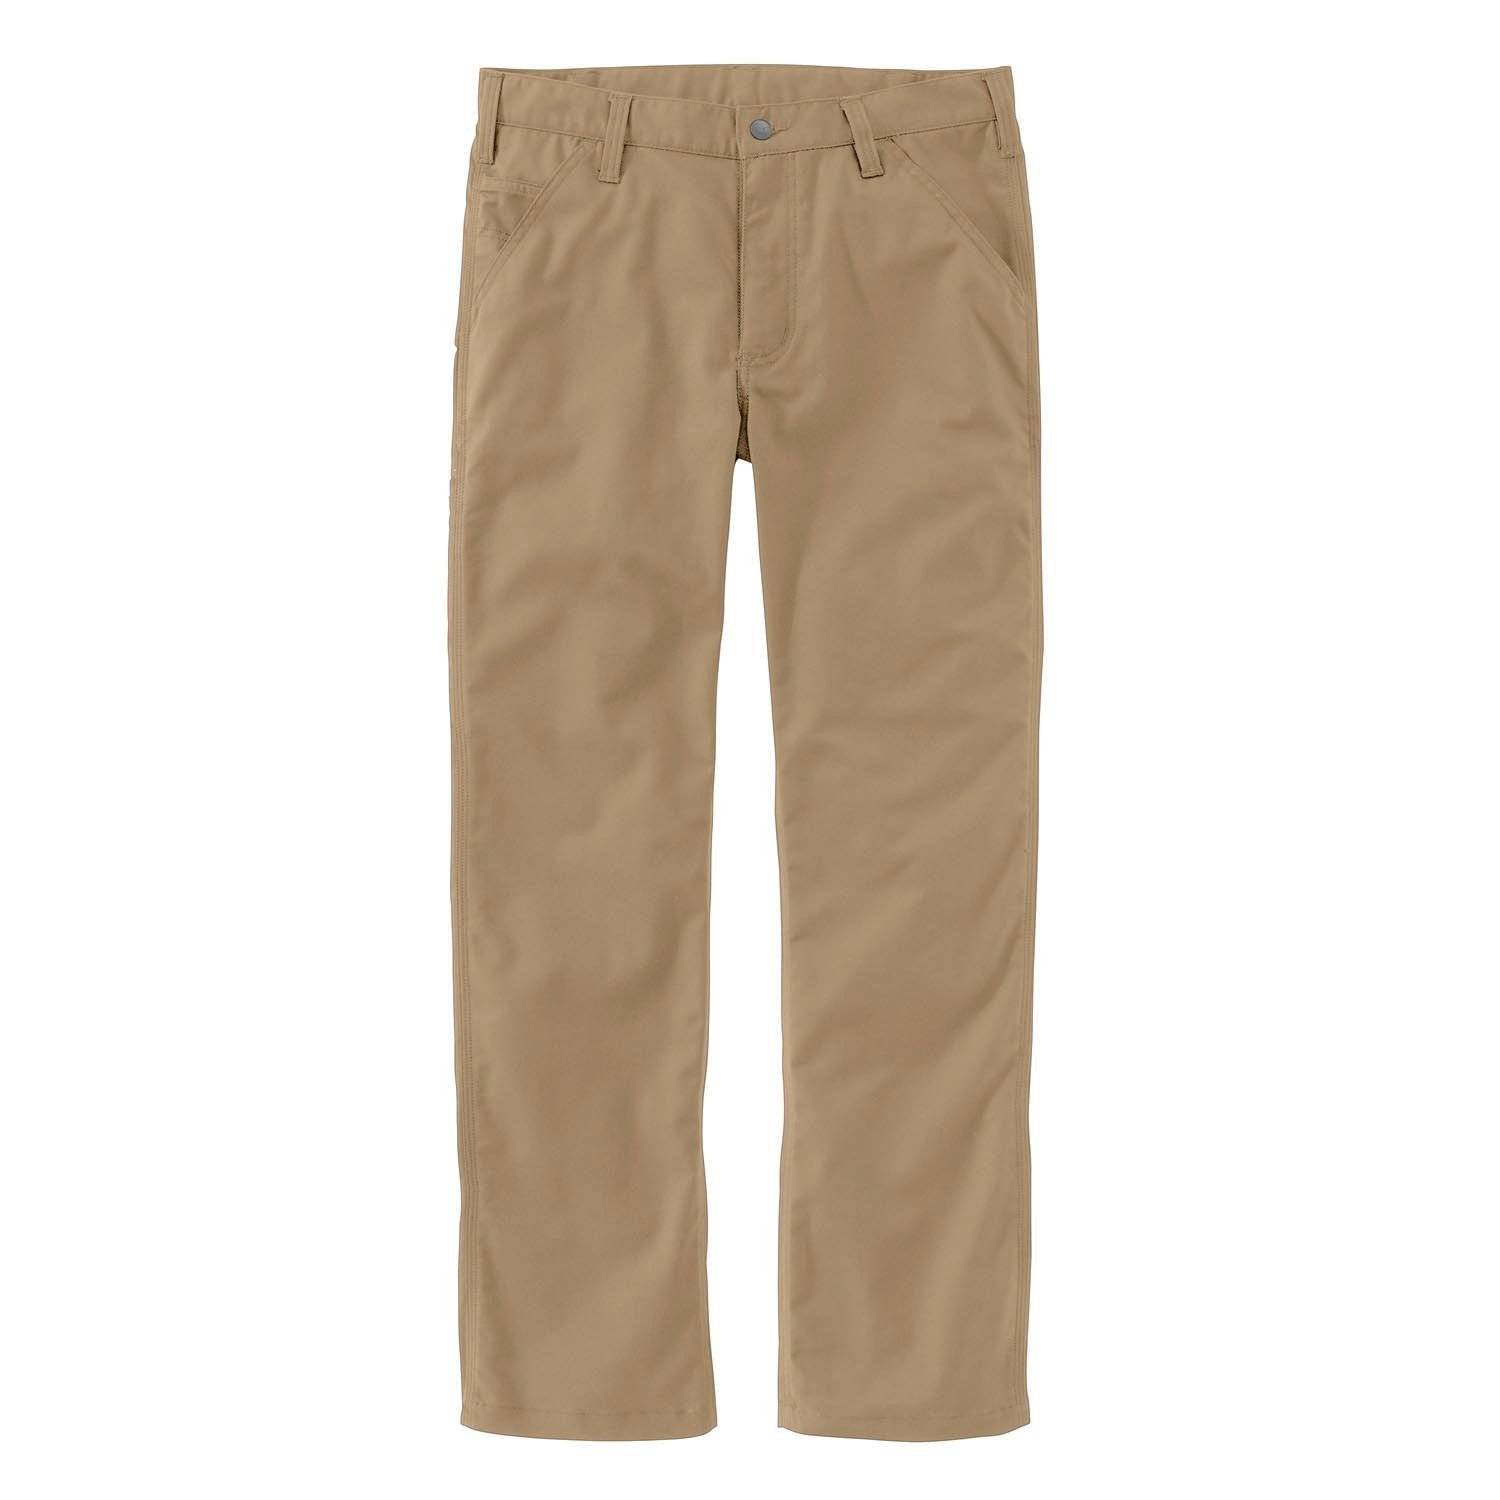 Carhartt Men's Rugged Professional Series Relaxed Fit Pants